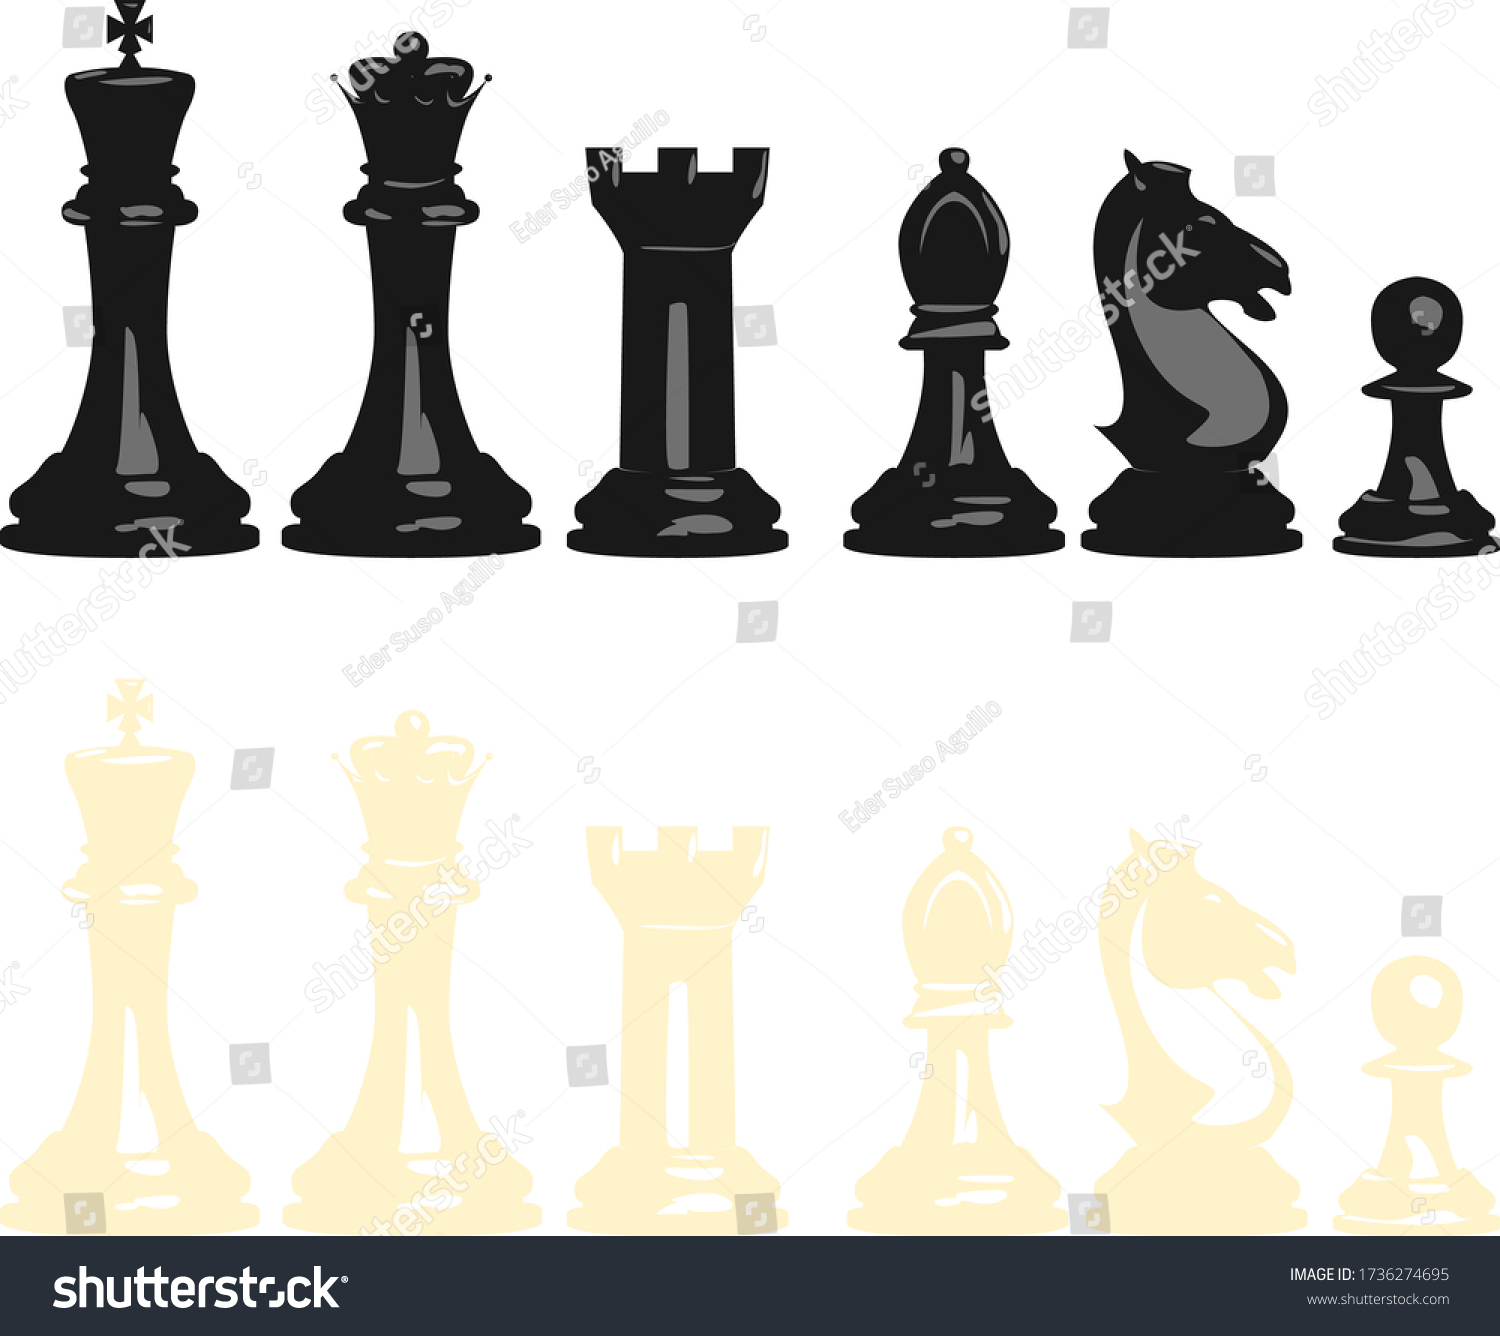 SVG of Vector illustration set of chess pieces, blacks and whites, contains all pieces: king, queen, tower, bishop, knight and pawn. svg